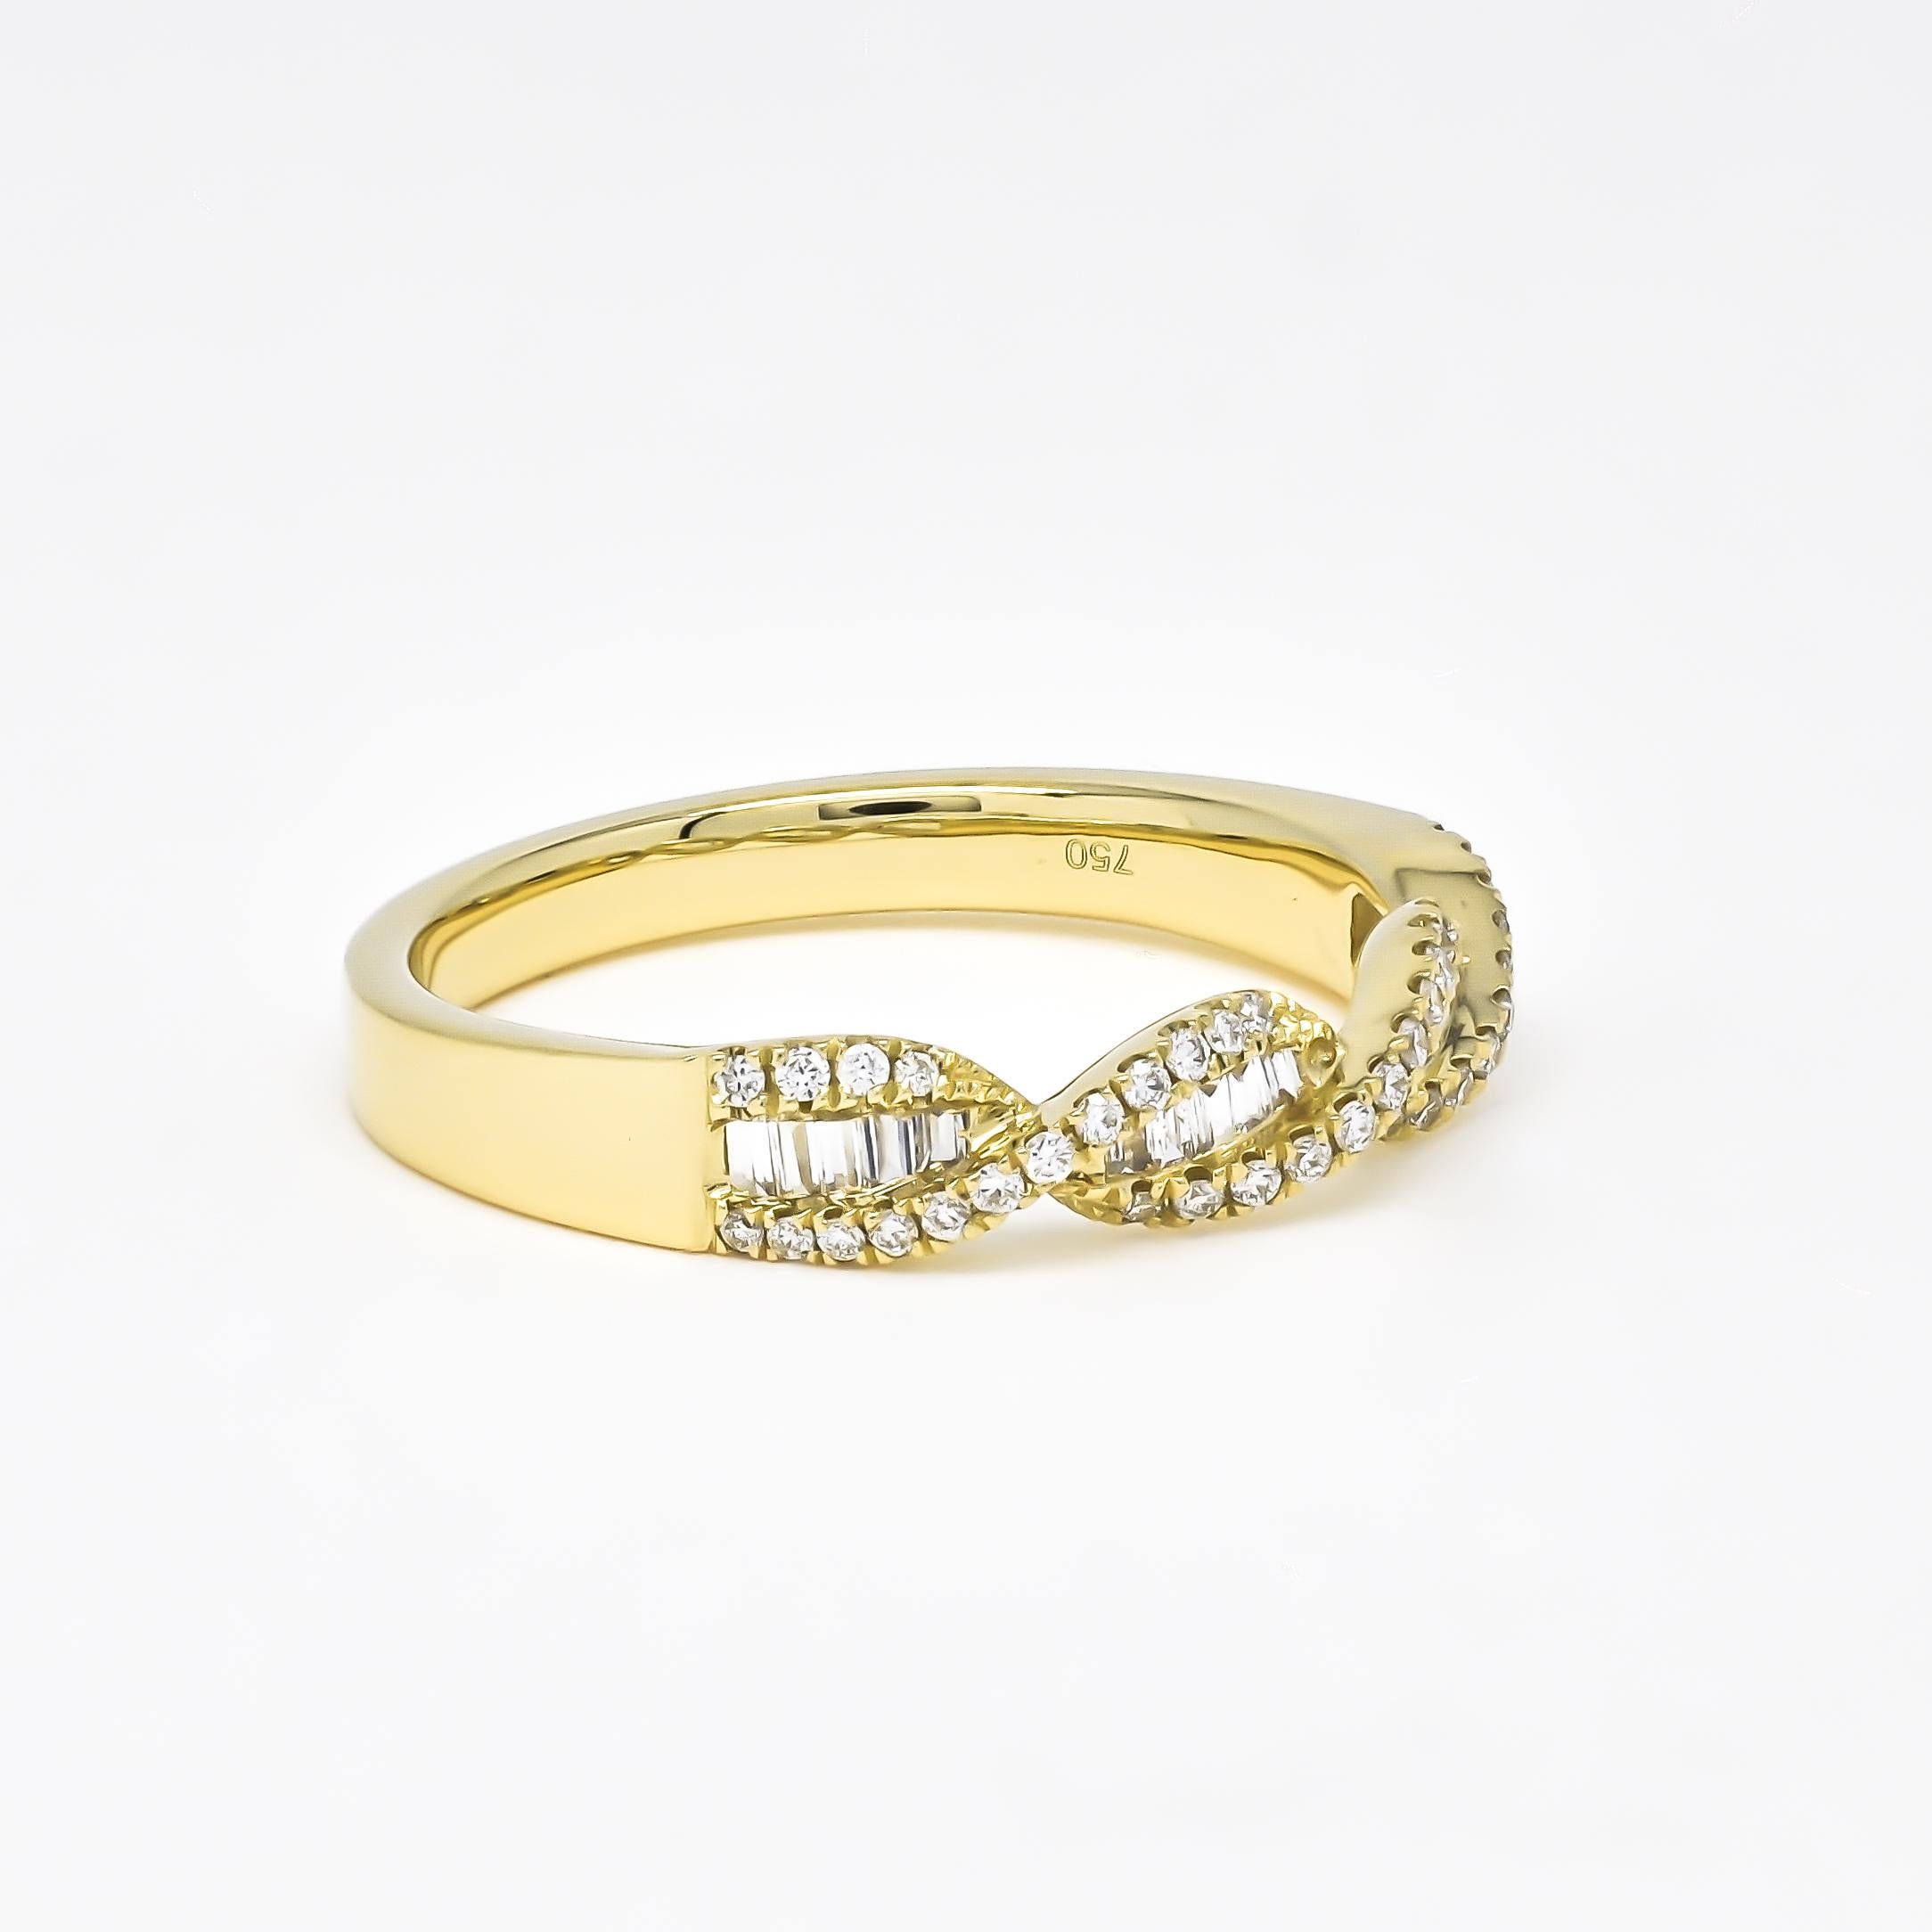 Make an impact with our dynamic DNA Felix fashion Band ring, encrusted with sparkling natural Baguette and Round diamonds.

The diamonds are set in cool DNA Felix 18K rose or yellow gold or white gold polished to a breathtaking luster.

Take note of